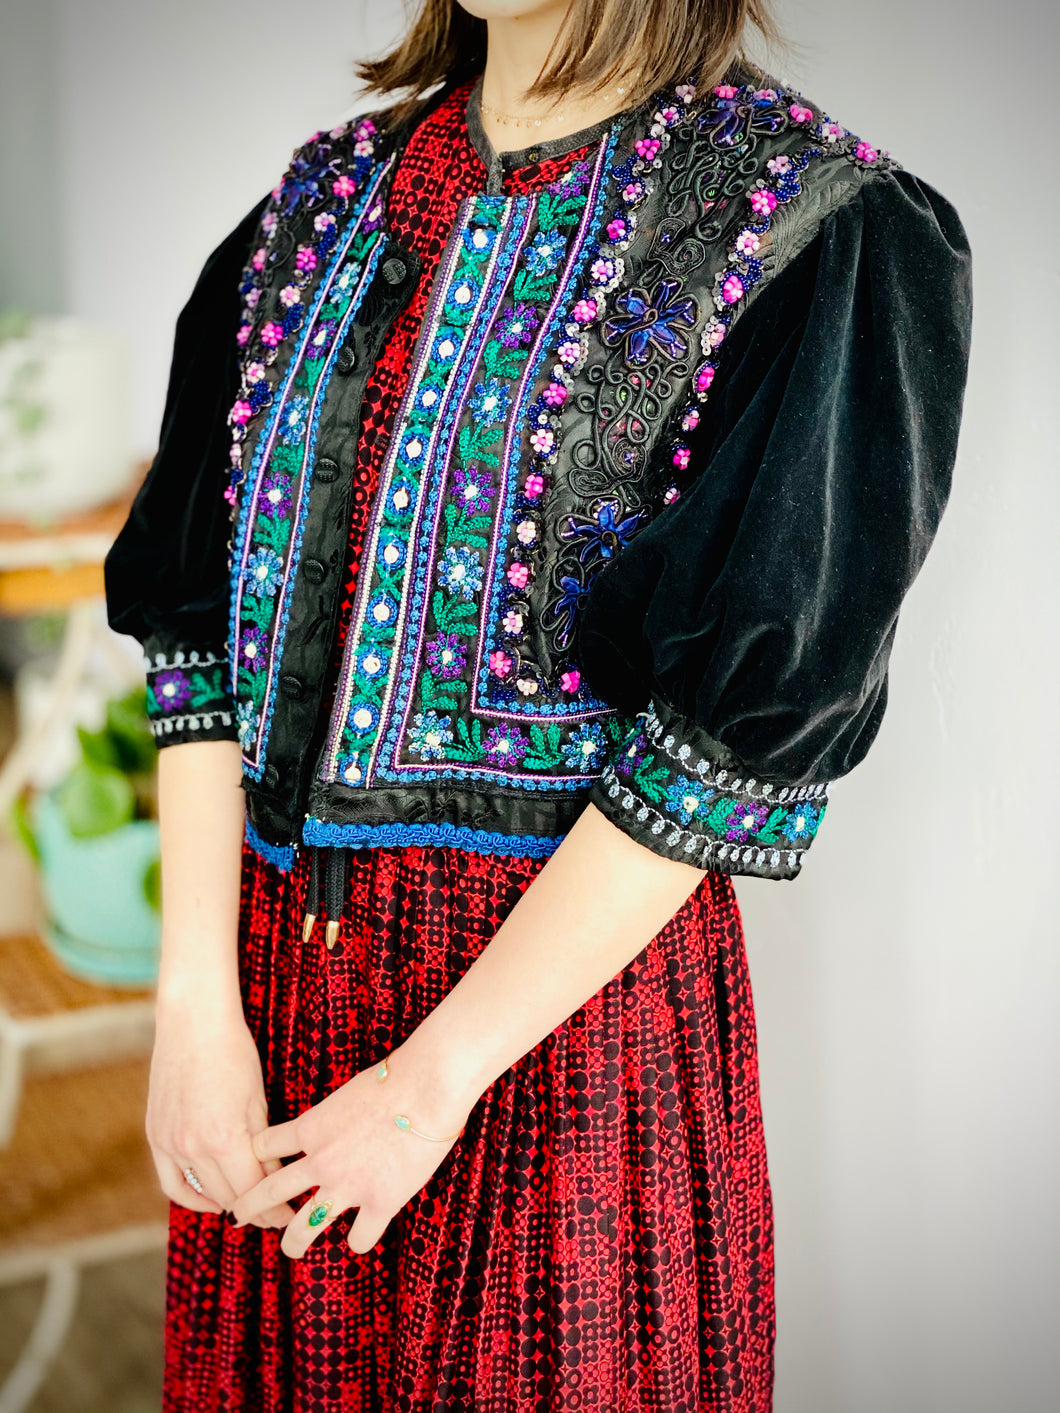 Vintage Colorful Beaded Embroidered Jacket with Velvet Balloon Sleeves